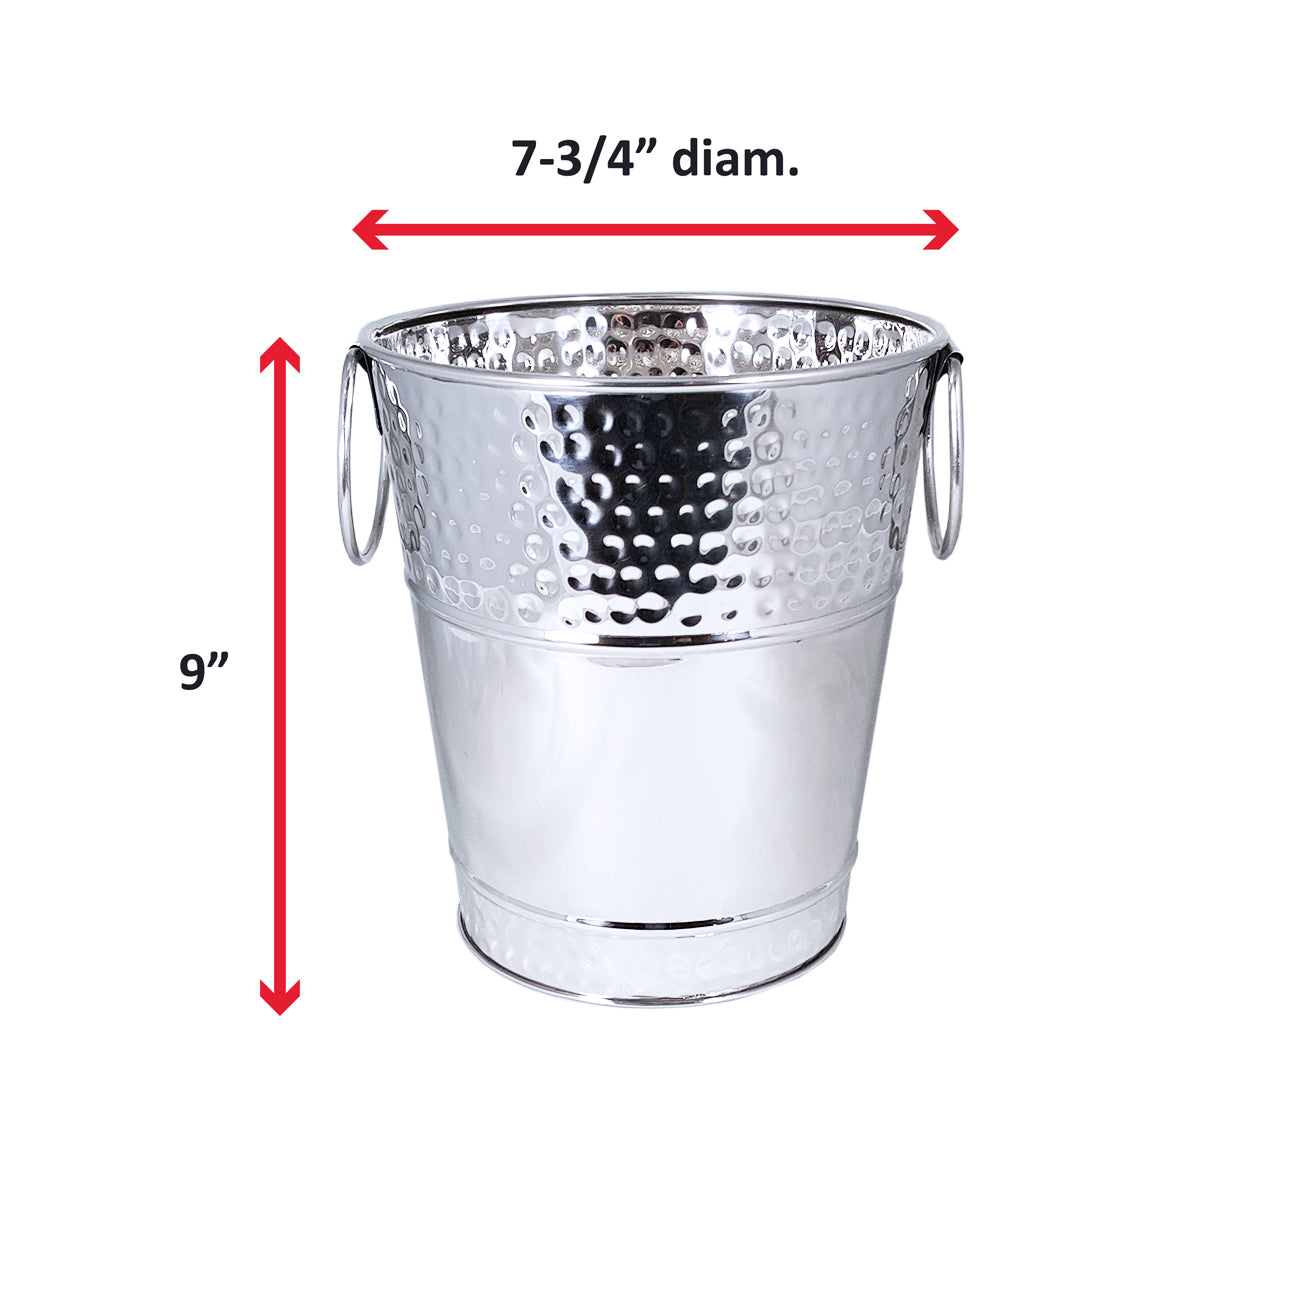 Wine bucket for parties that can also be used as an ice bucket to hold clean ice for parties.  Chill wine or champagne or clean ice in the kitchen, bar, dining room, or on the patio.  Made of durable stainless steel.